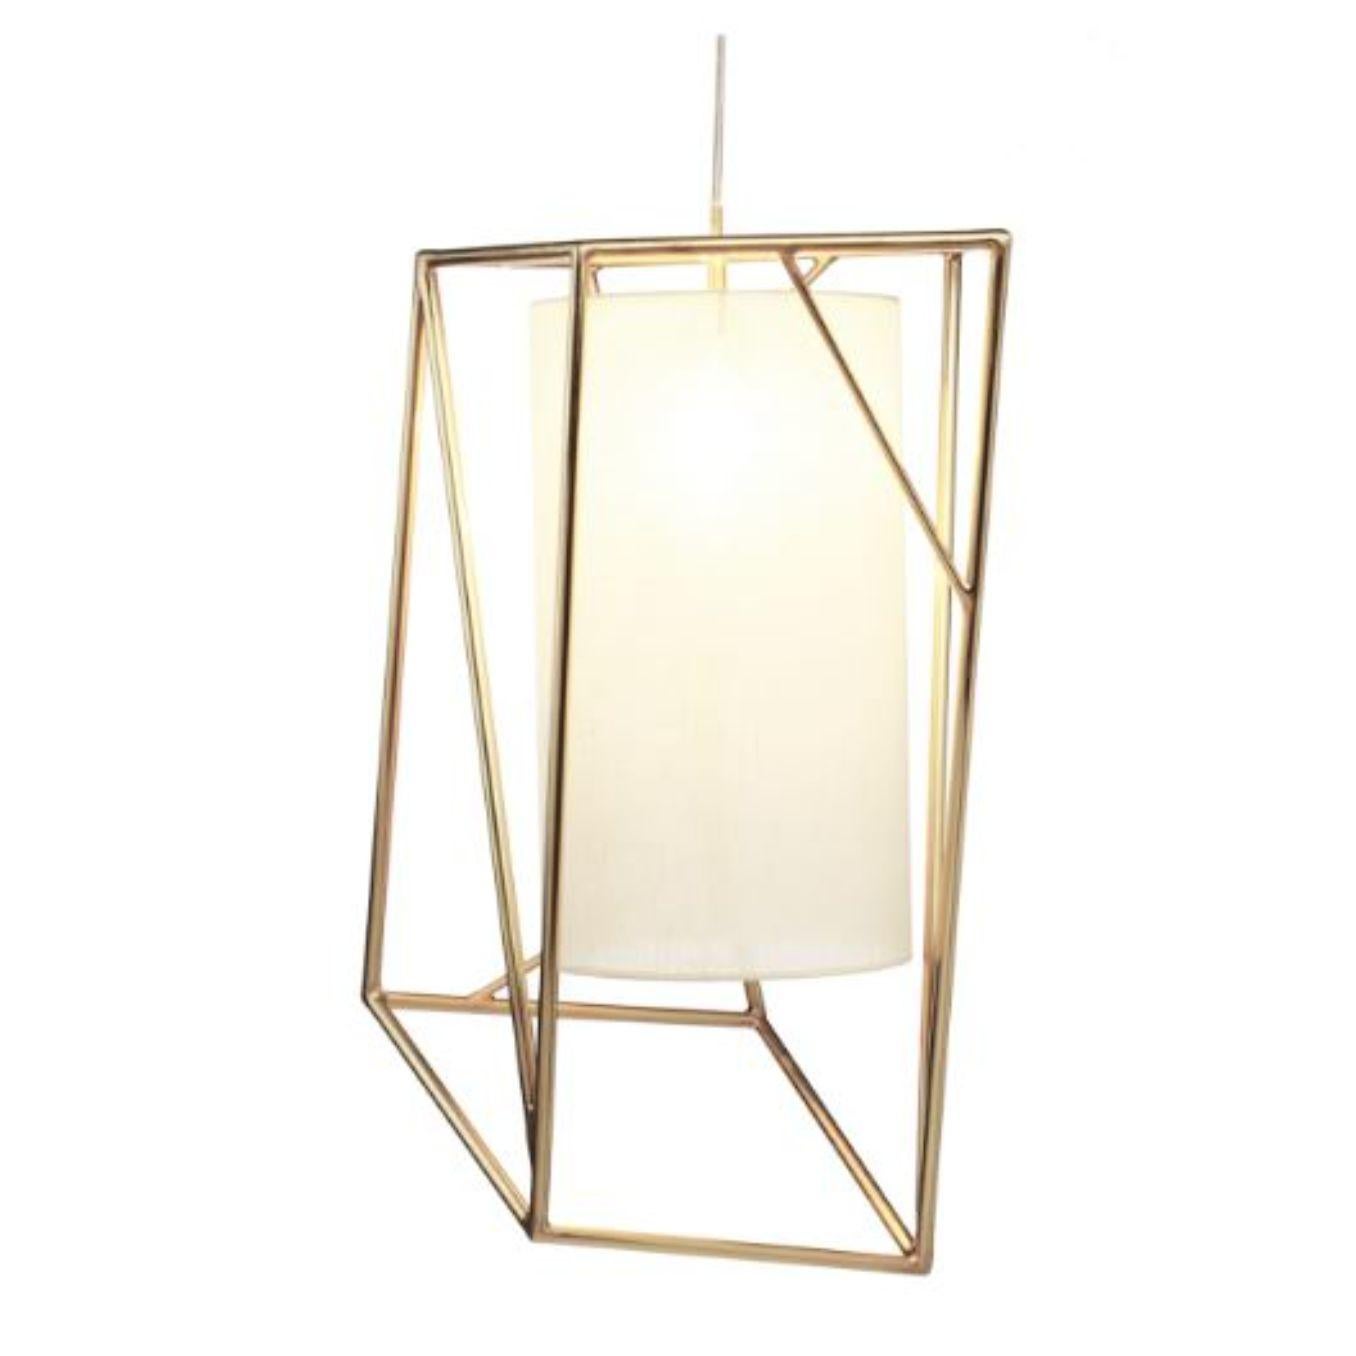 Brass Star II suspension lamp by Dooq
Dimensions: W 45 x D 45 x H 72 cm
Materials: lacquered metal, polished or satin metal, brass.
Also available in different colors and materials.

Information:
230V/50Hz
E27/1x20W LED
120V/60Hz
E26/1x15W